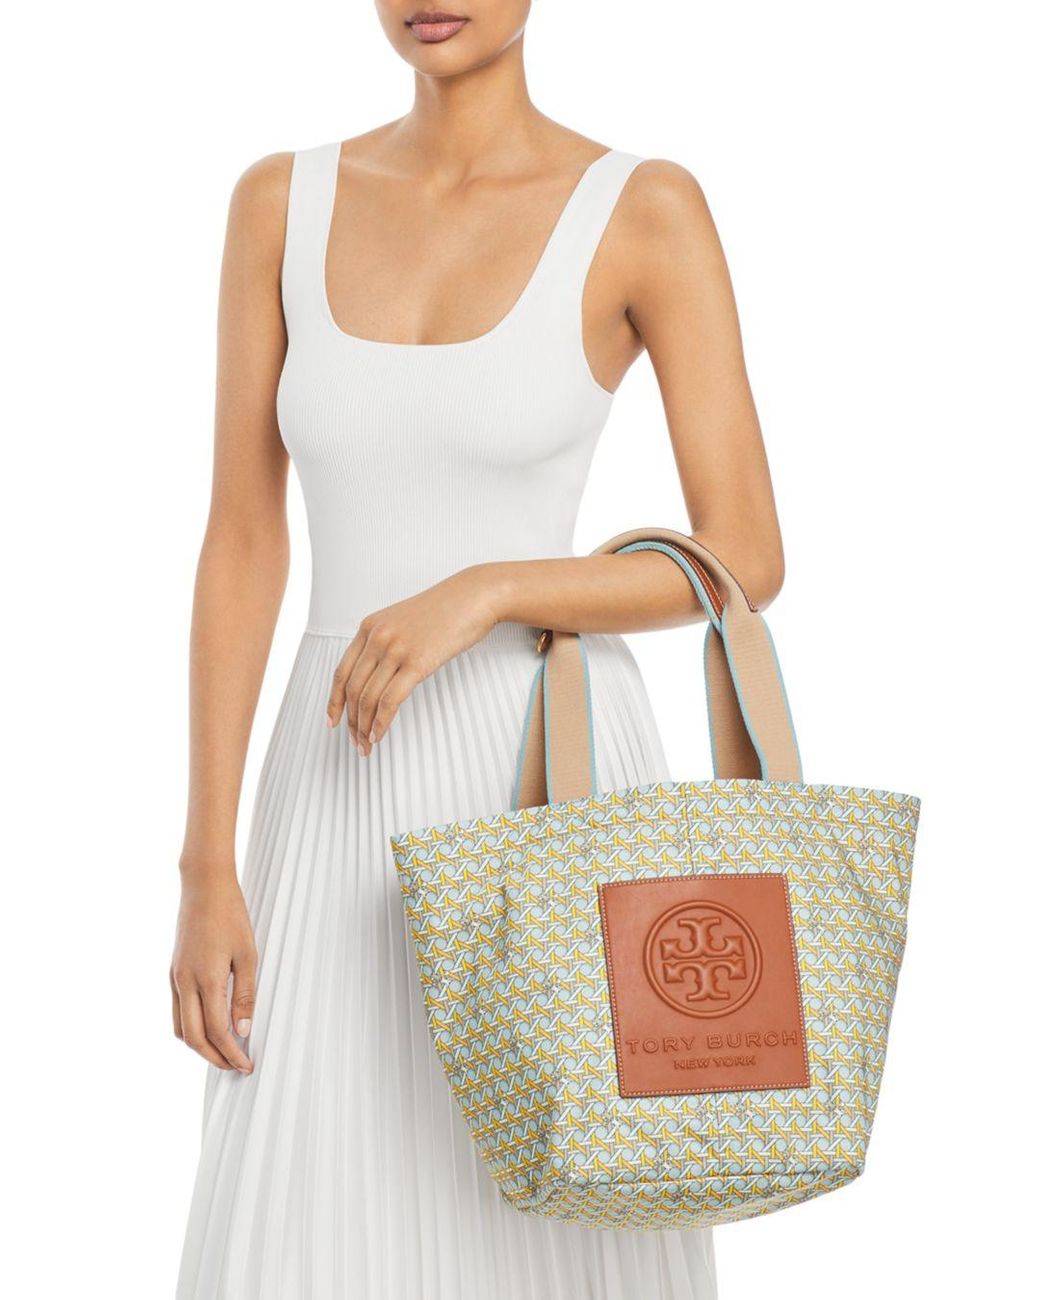 Tory Burch Printed Small Tote Bag | Lyst